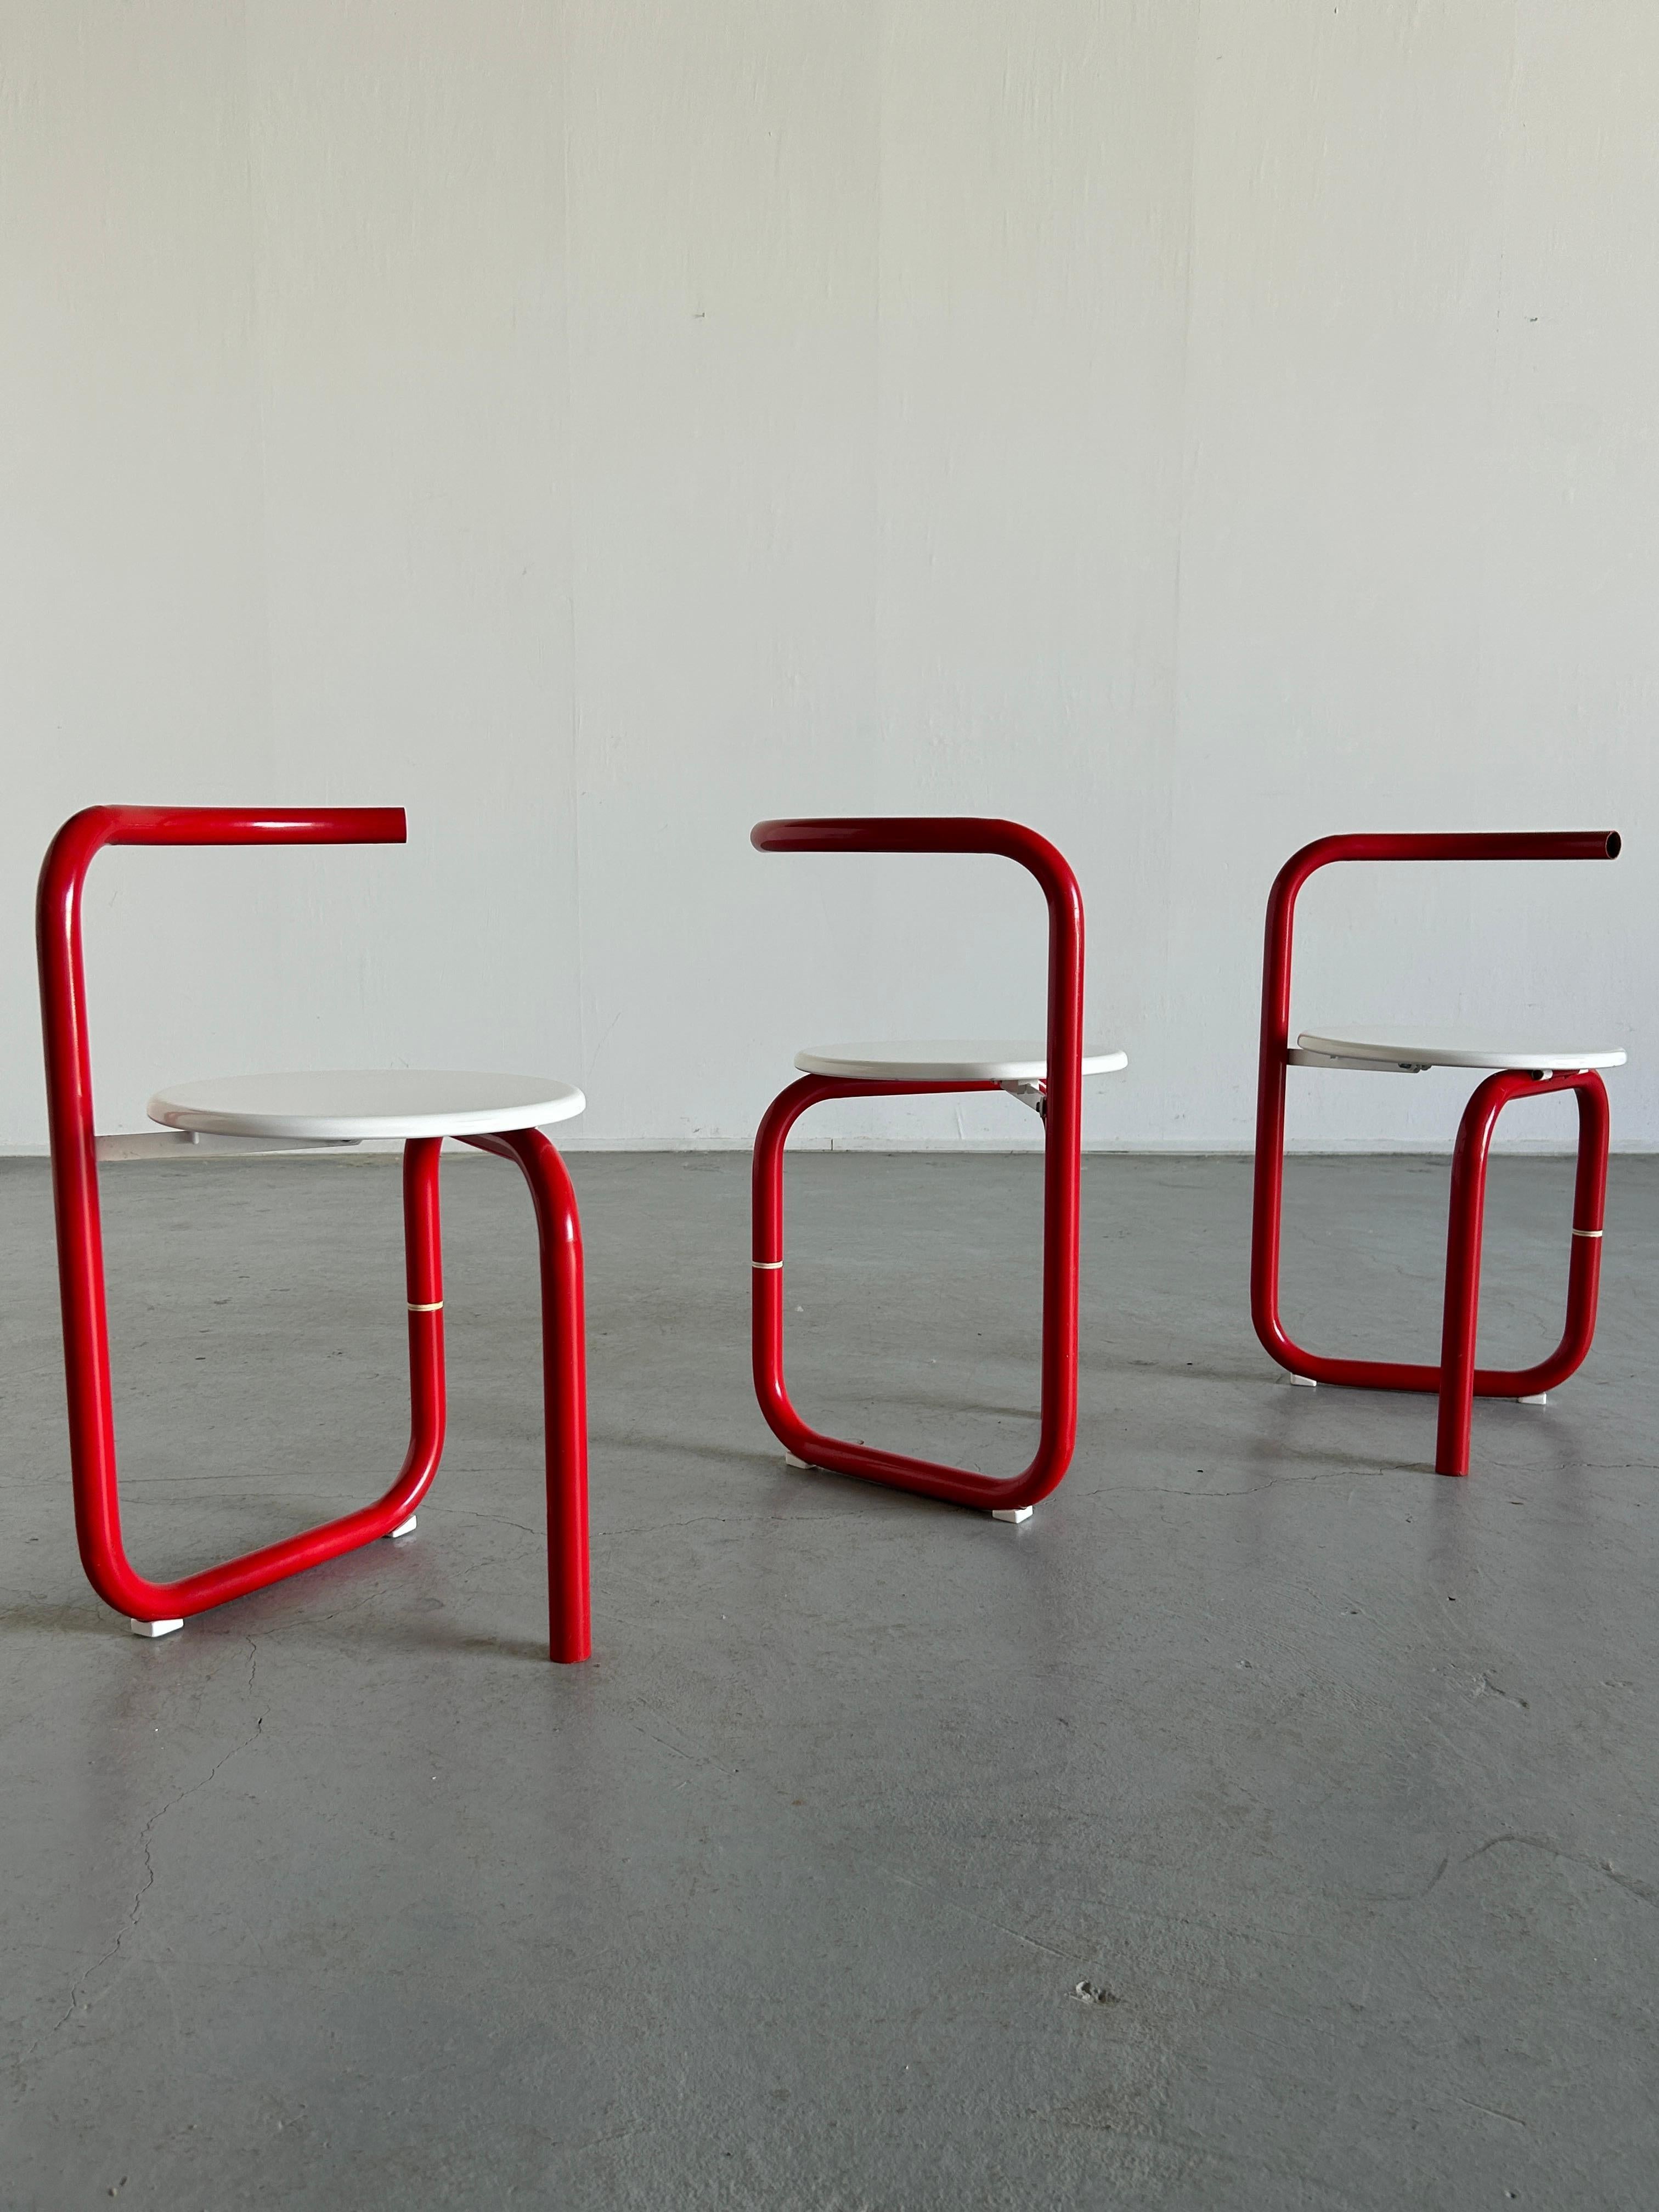 Vintage Minimalist Pop Art Garden Seating Set, Folding Chairs and Table, 1970s For Sale 9